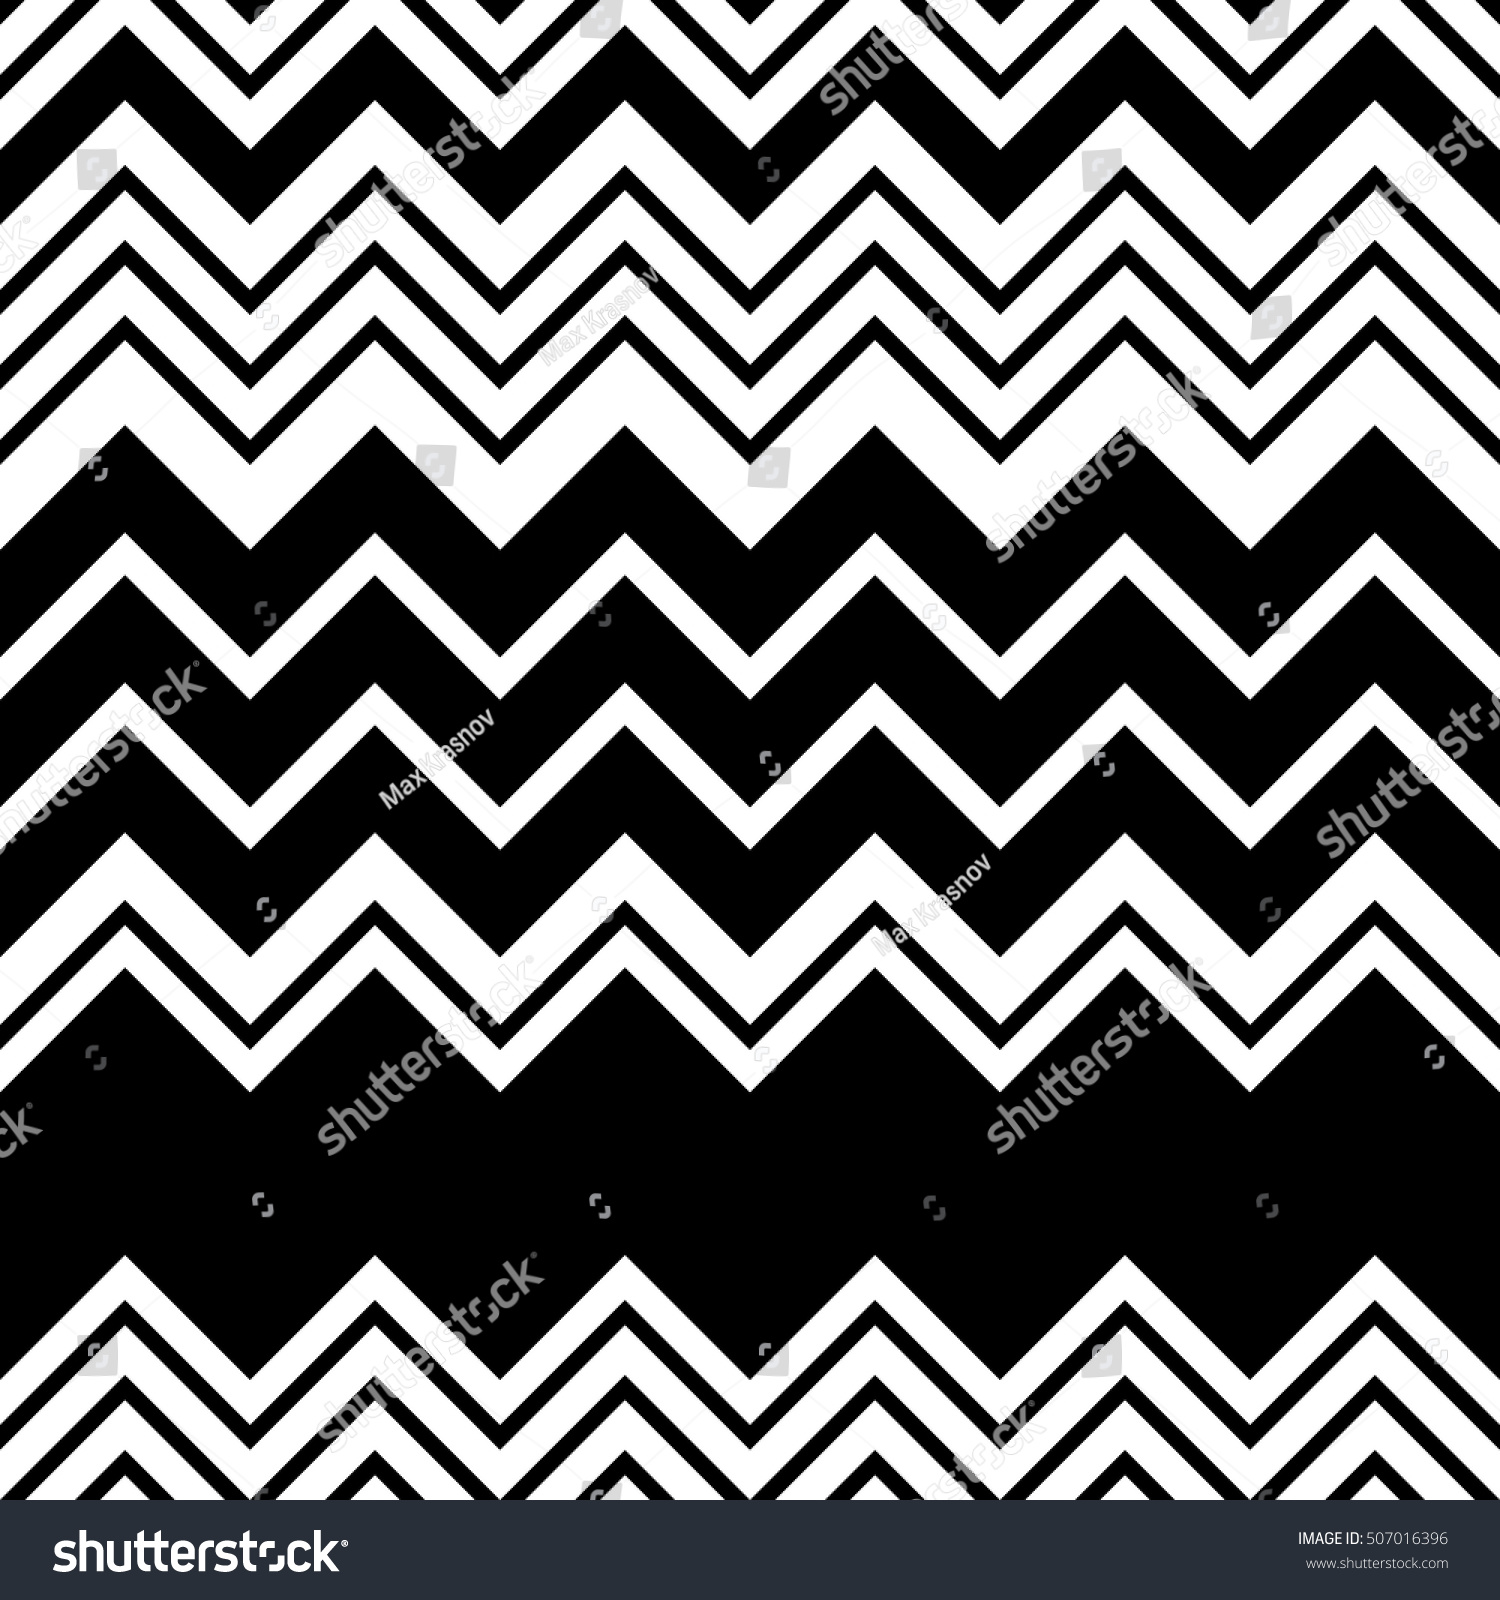 Seamless Zigzag  Pattern Abstract Black  White  Stock Vector 